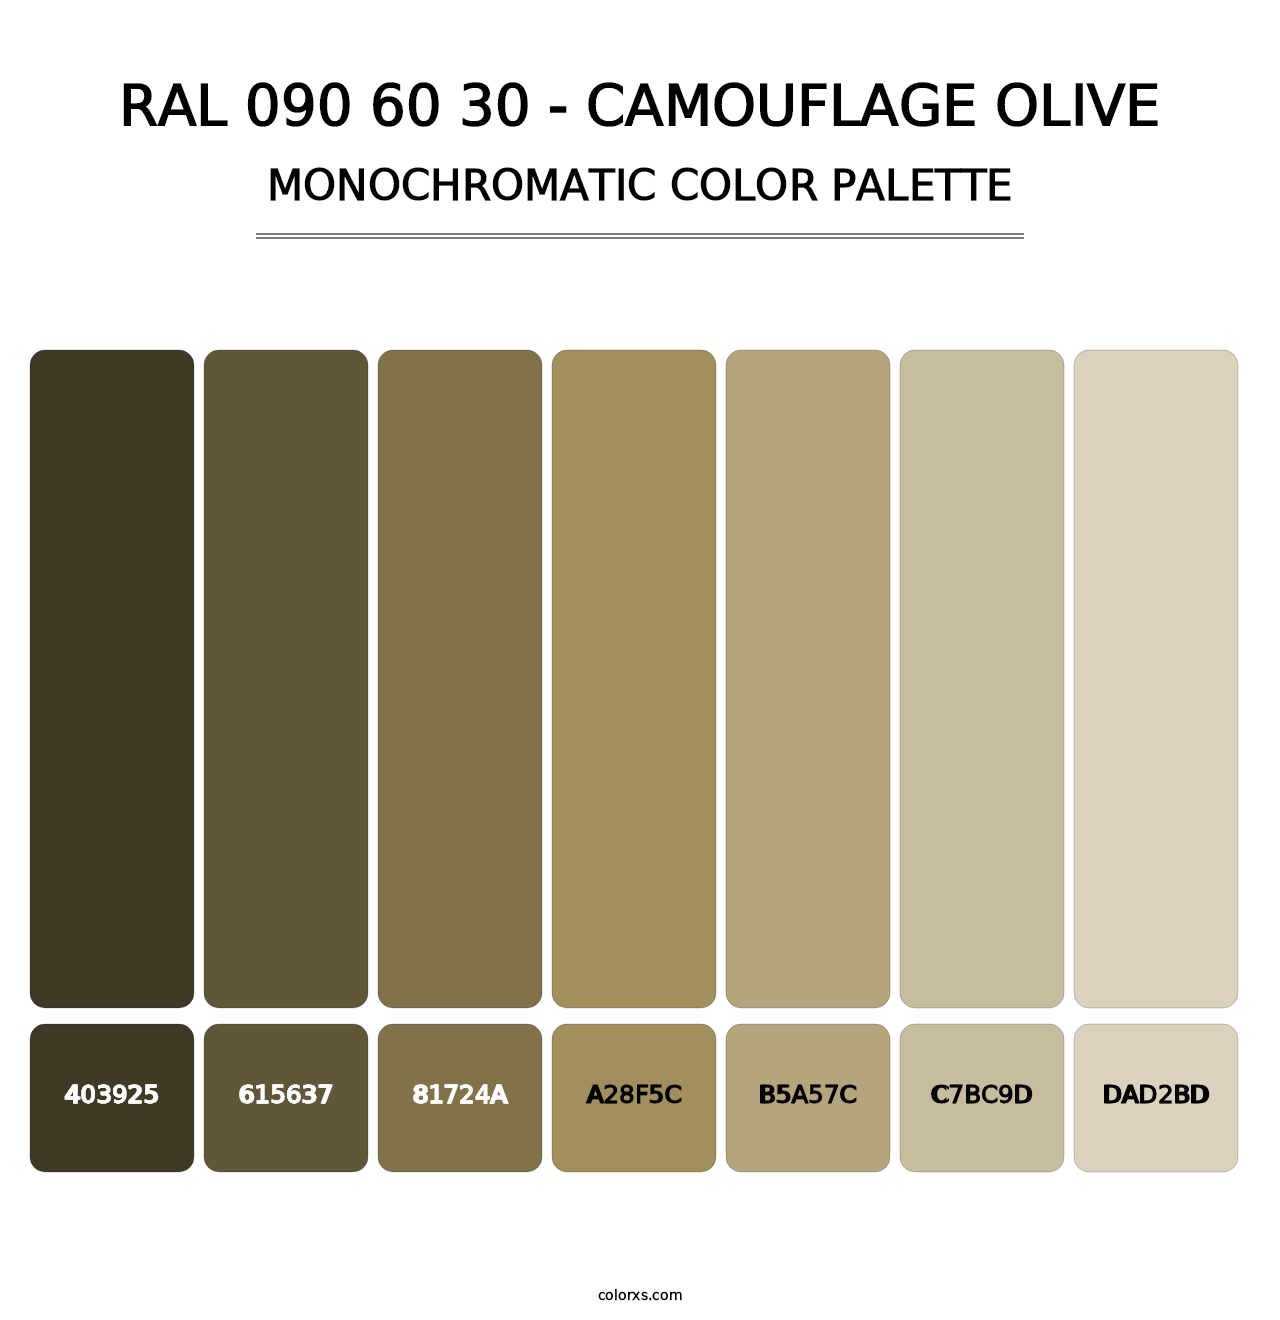 RAL 090 60 30 - Camouflage Olive - Monochromatic Color Palette